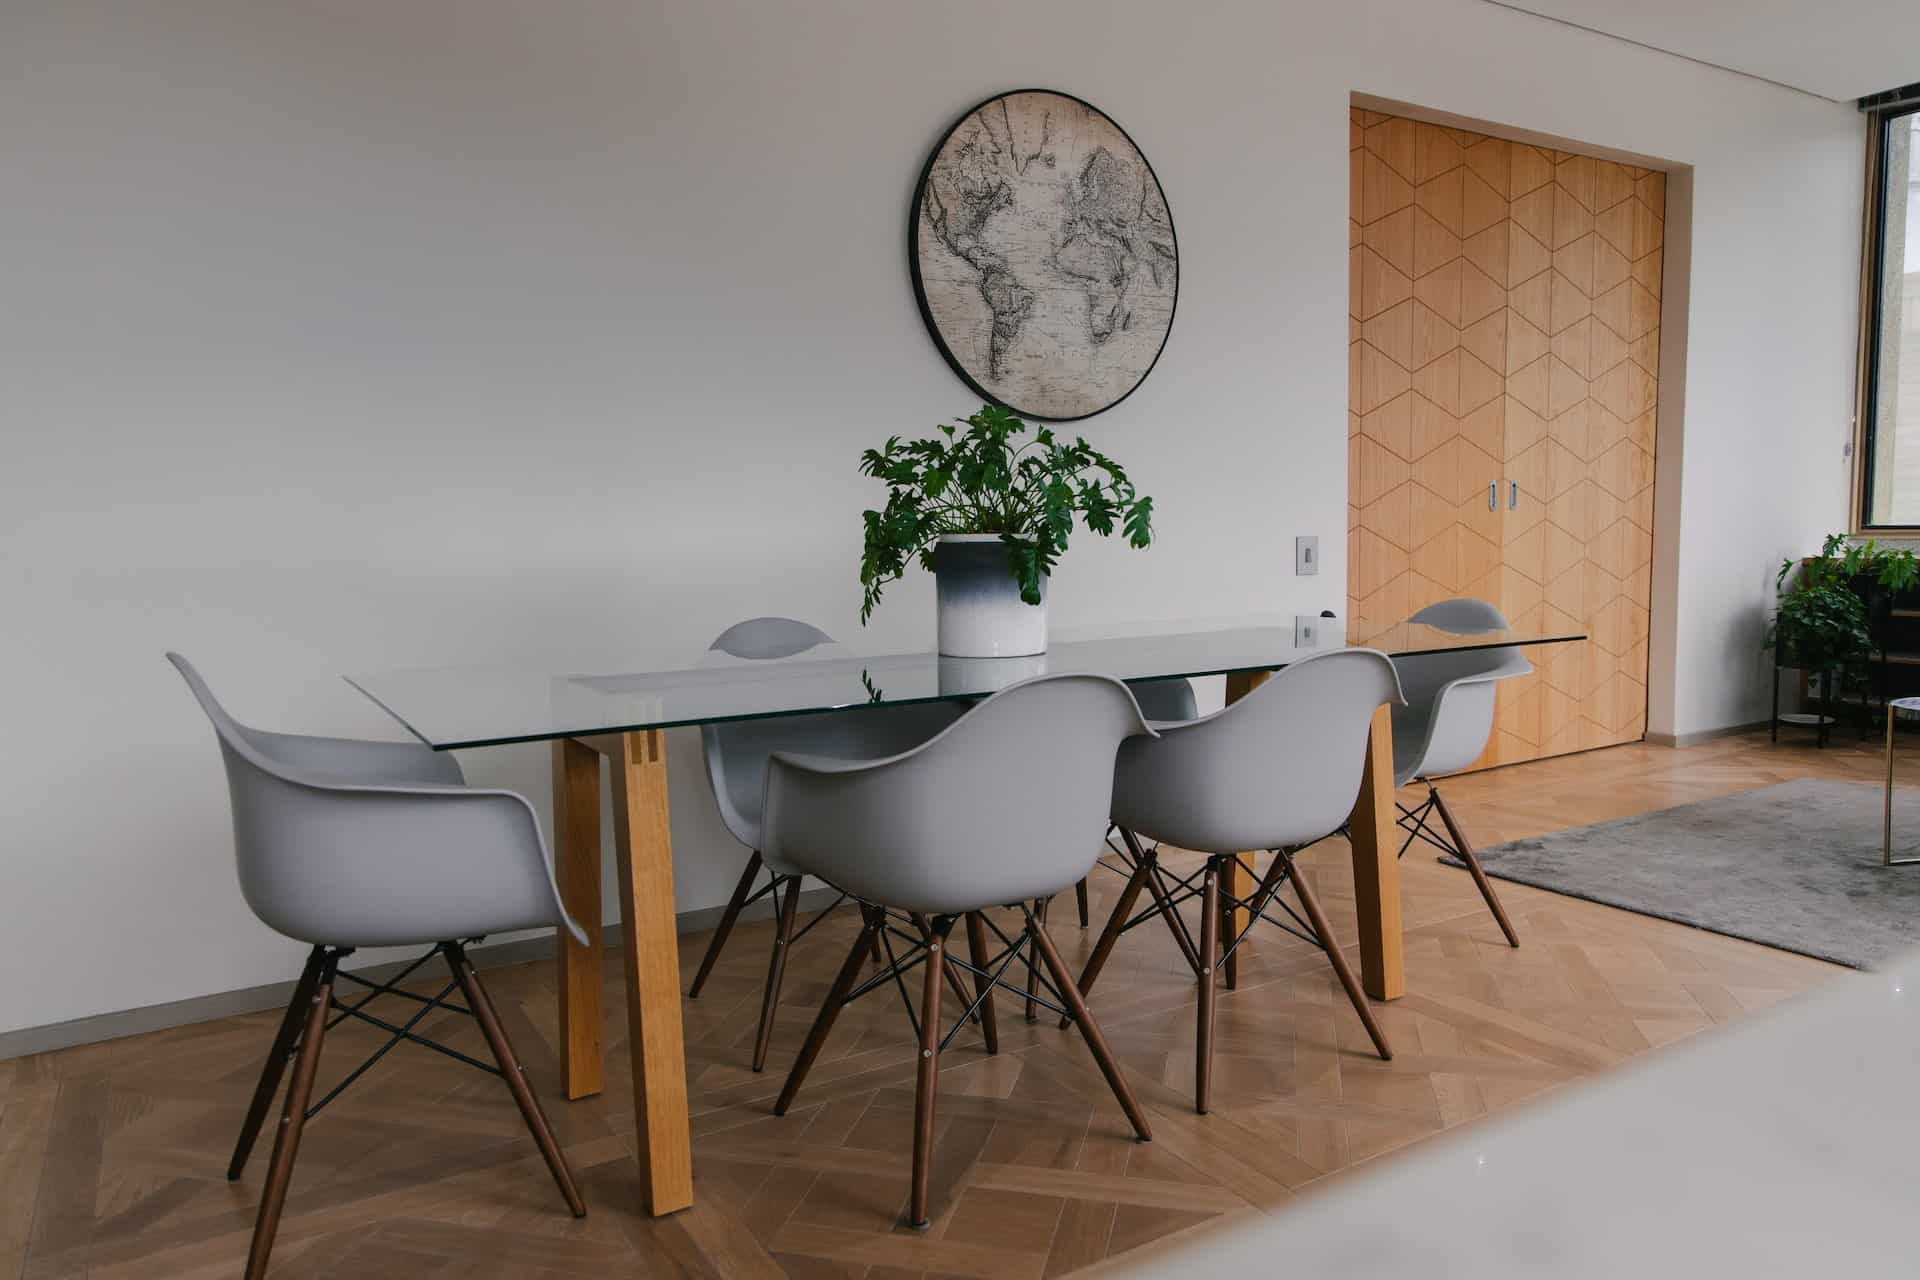 Dining Tables – The Furniture You Need for the Perfect Dining Room